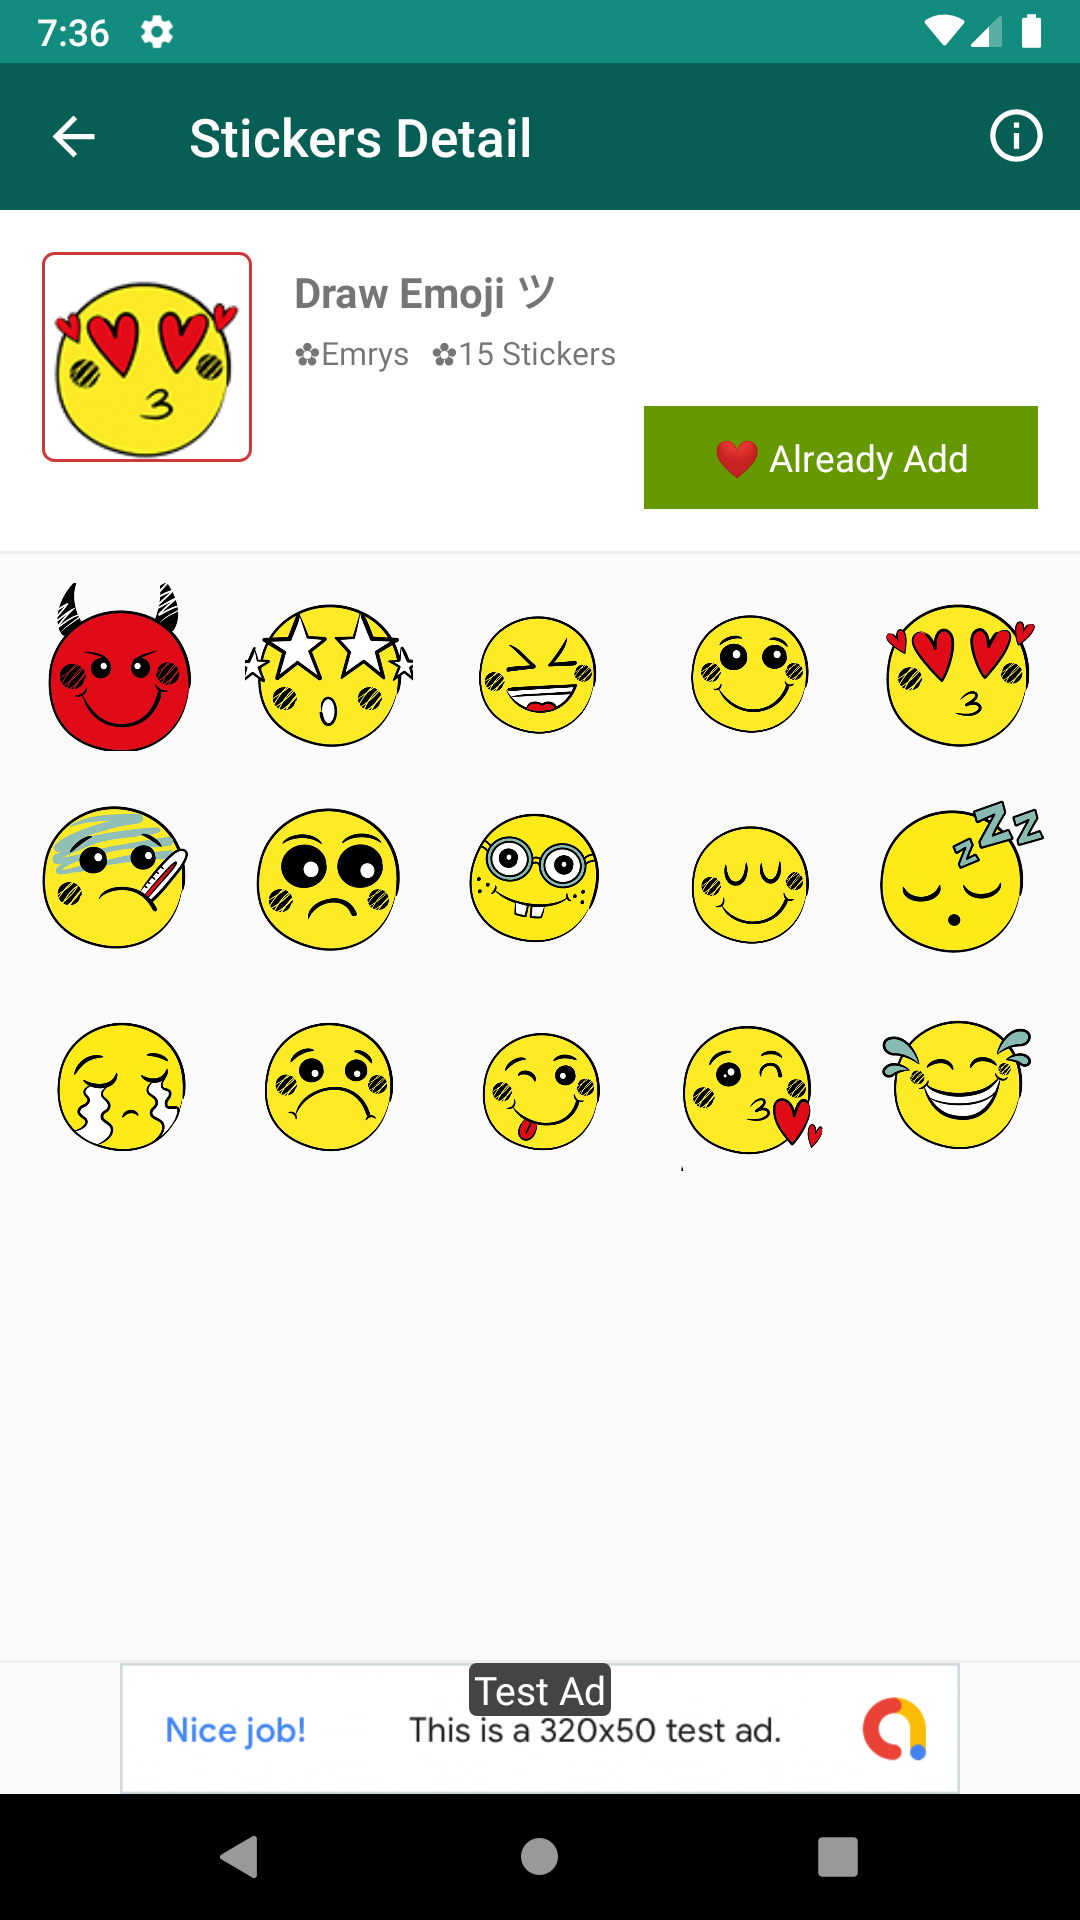 Emrys Online Android Stickers App For Whatsapp With Sticker Maker